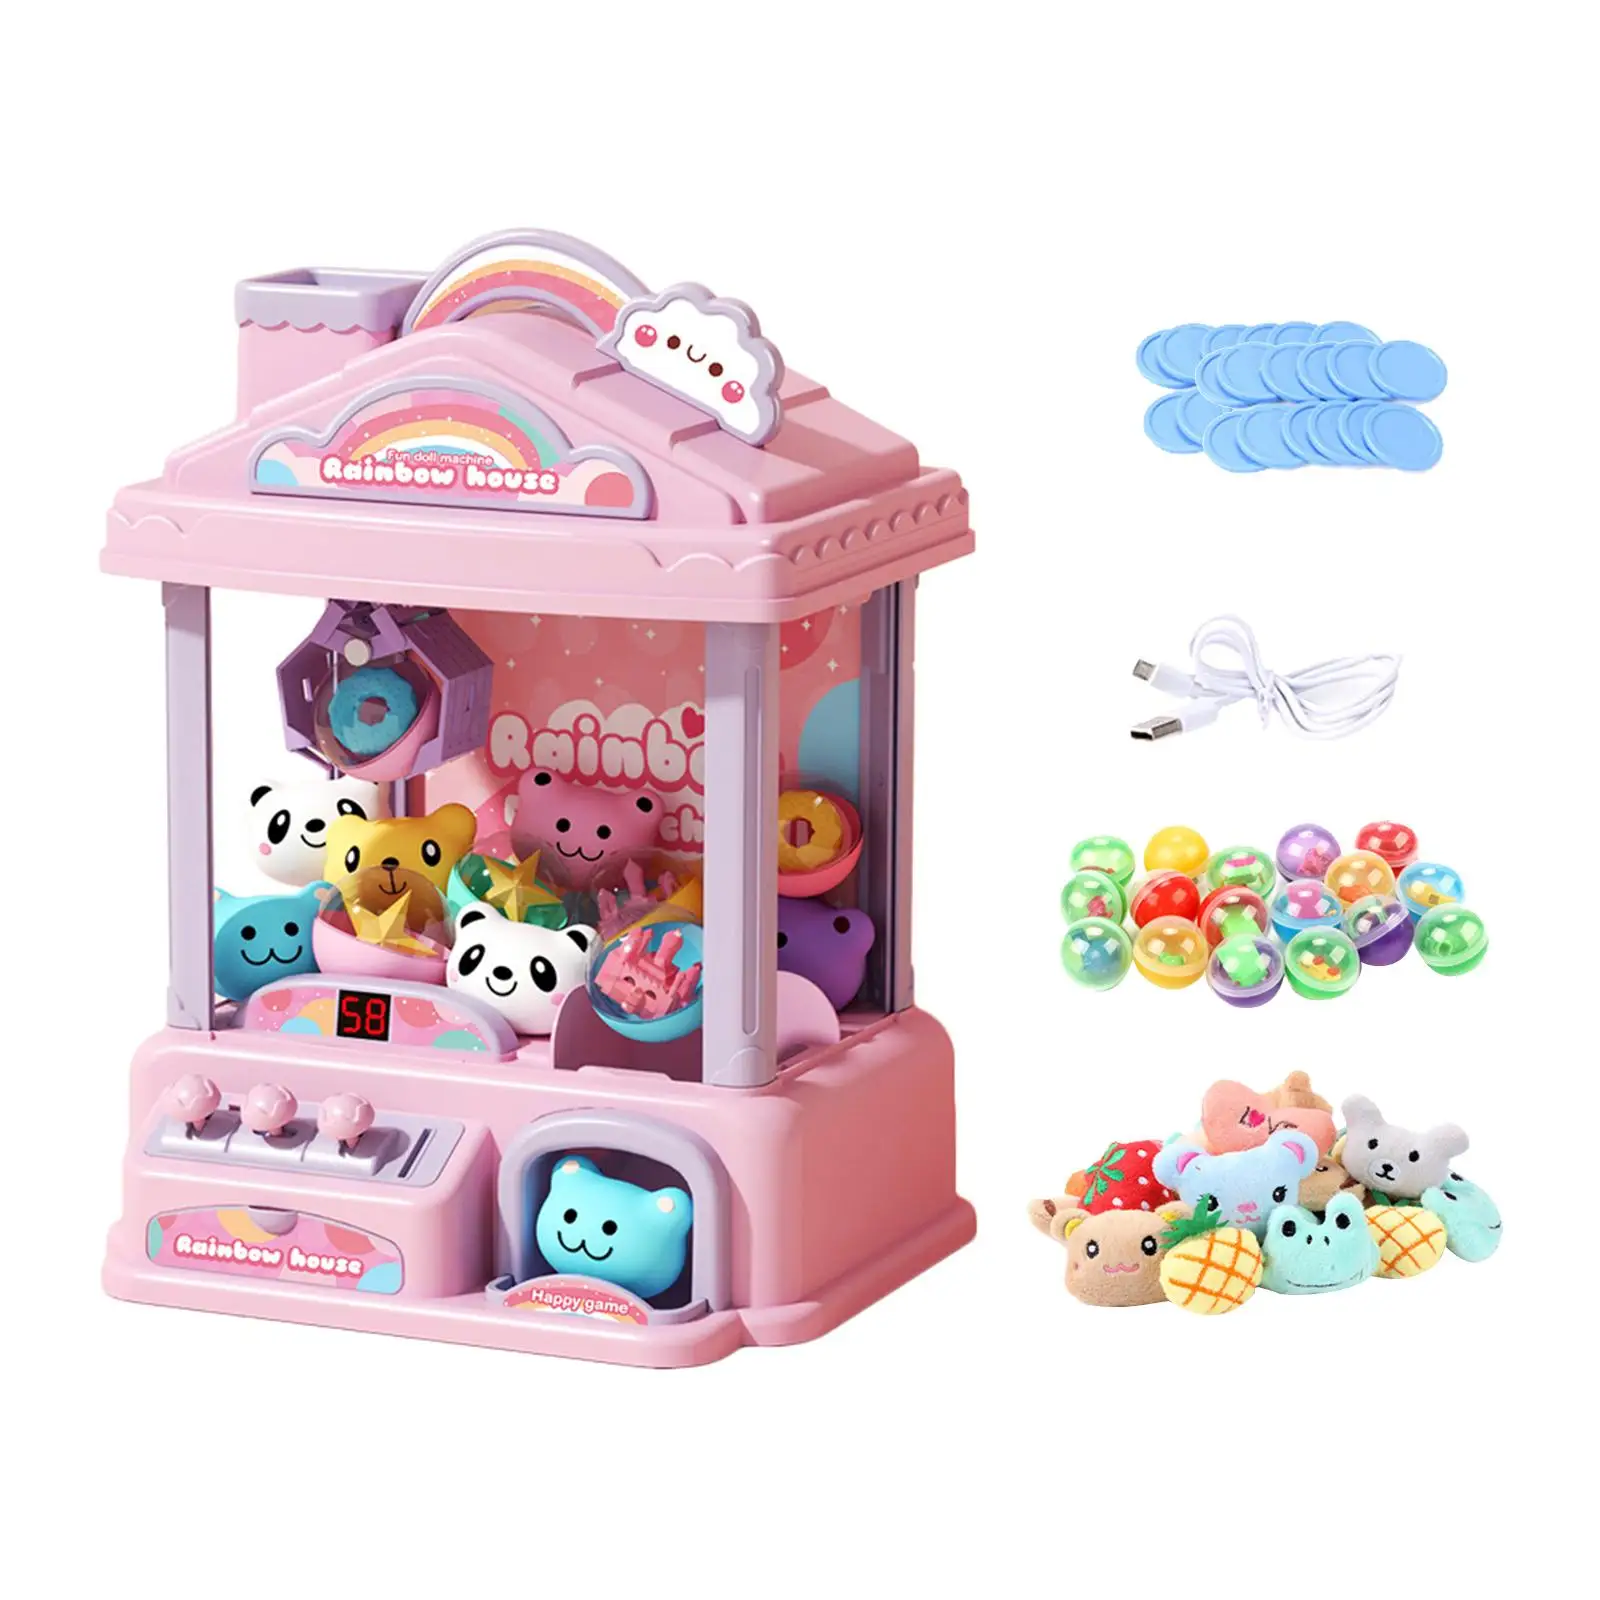 Claw Machine Electronic Small Toys with 20 Dolls 20 Capsules Mini Vending Machine for Toddler Boys Girls Kid Children Best Gifts